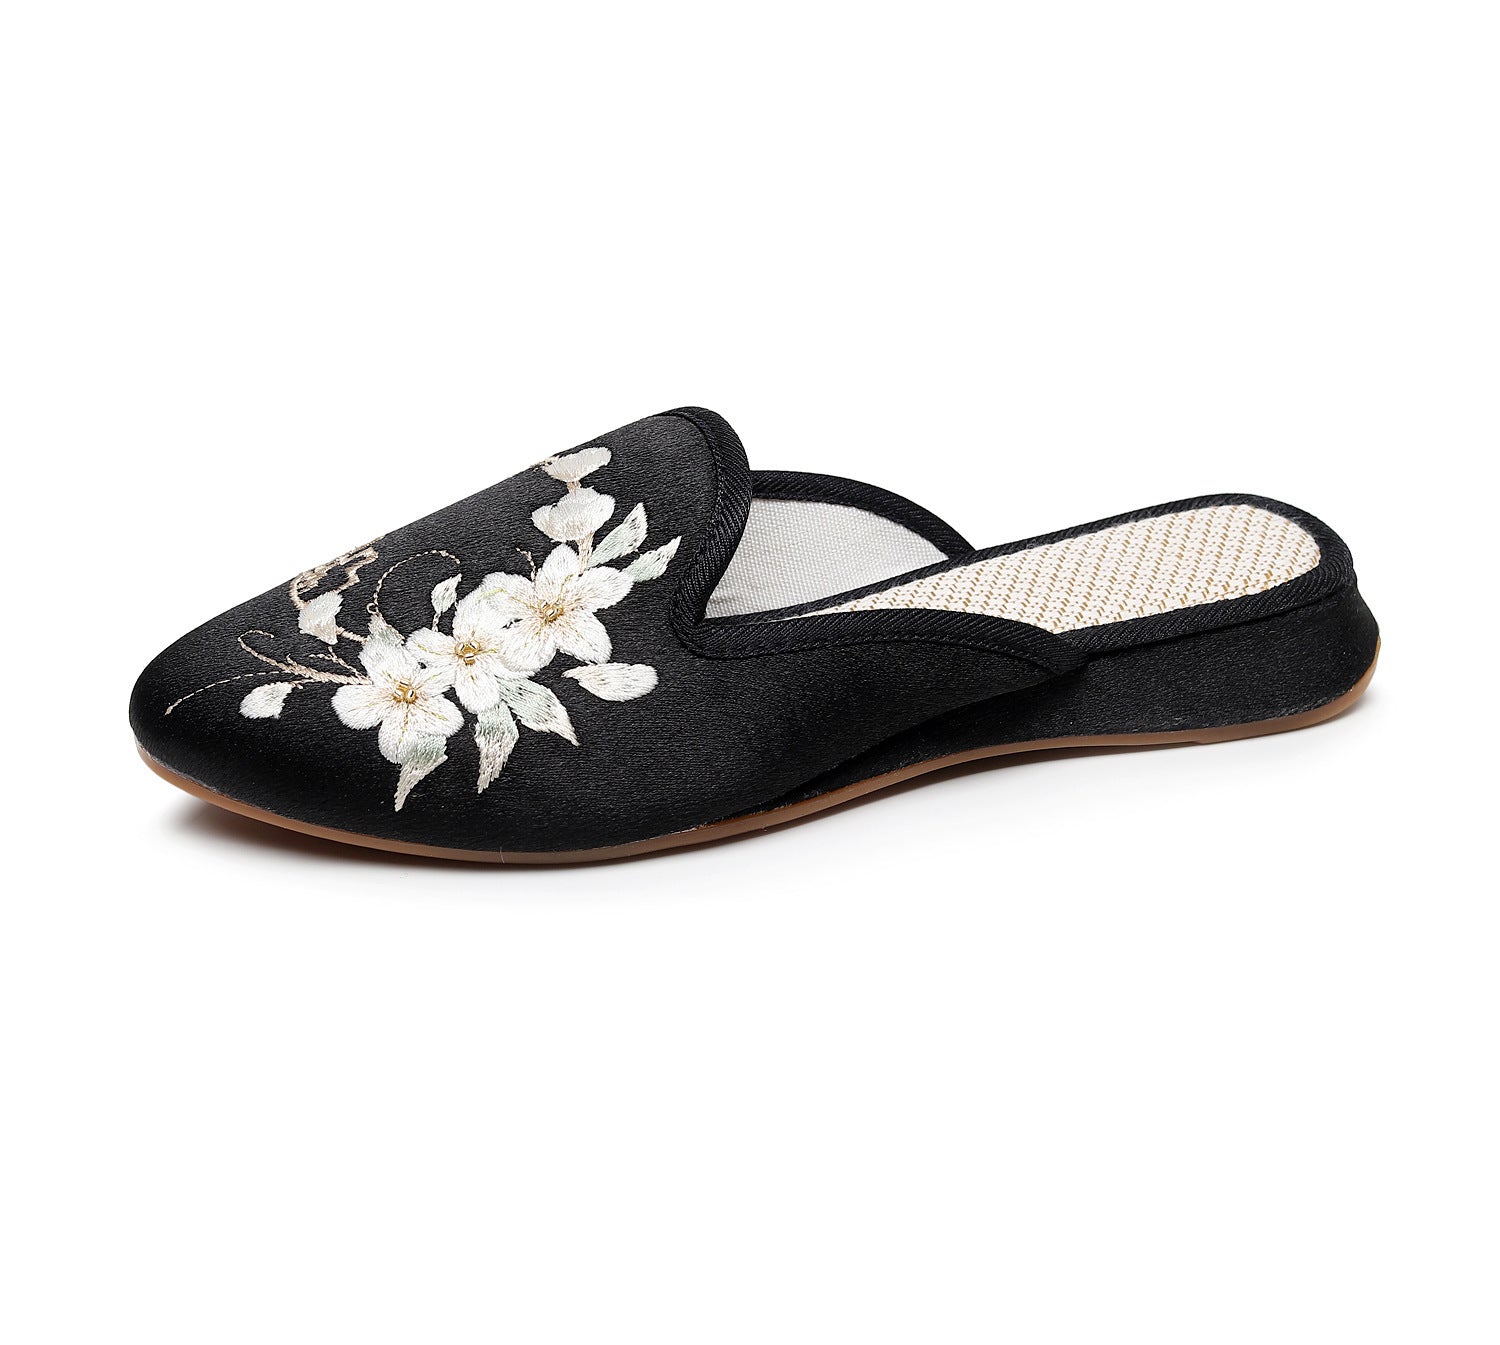 Women's Mercerizing Satin-surface Embroidered Slippers